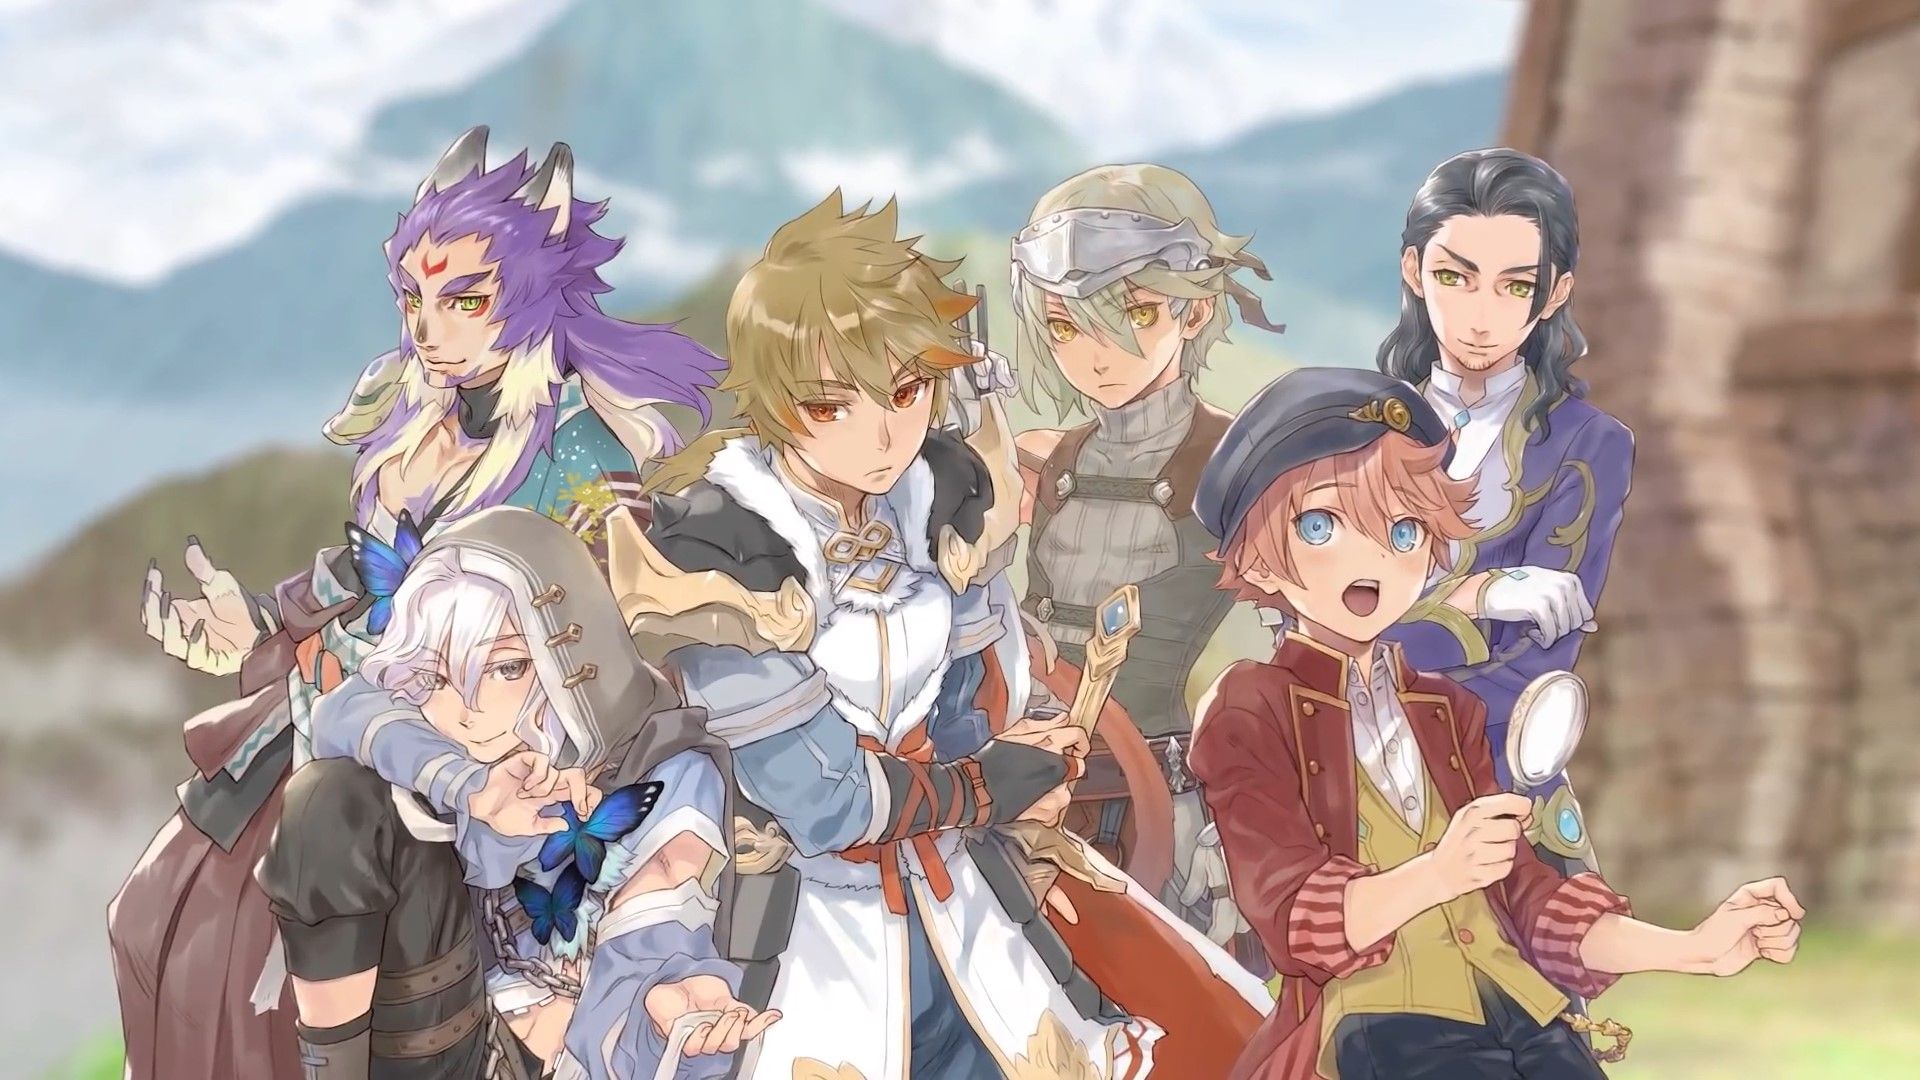 Rune Factory 5 trailer bachelor characters